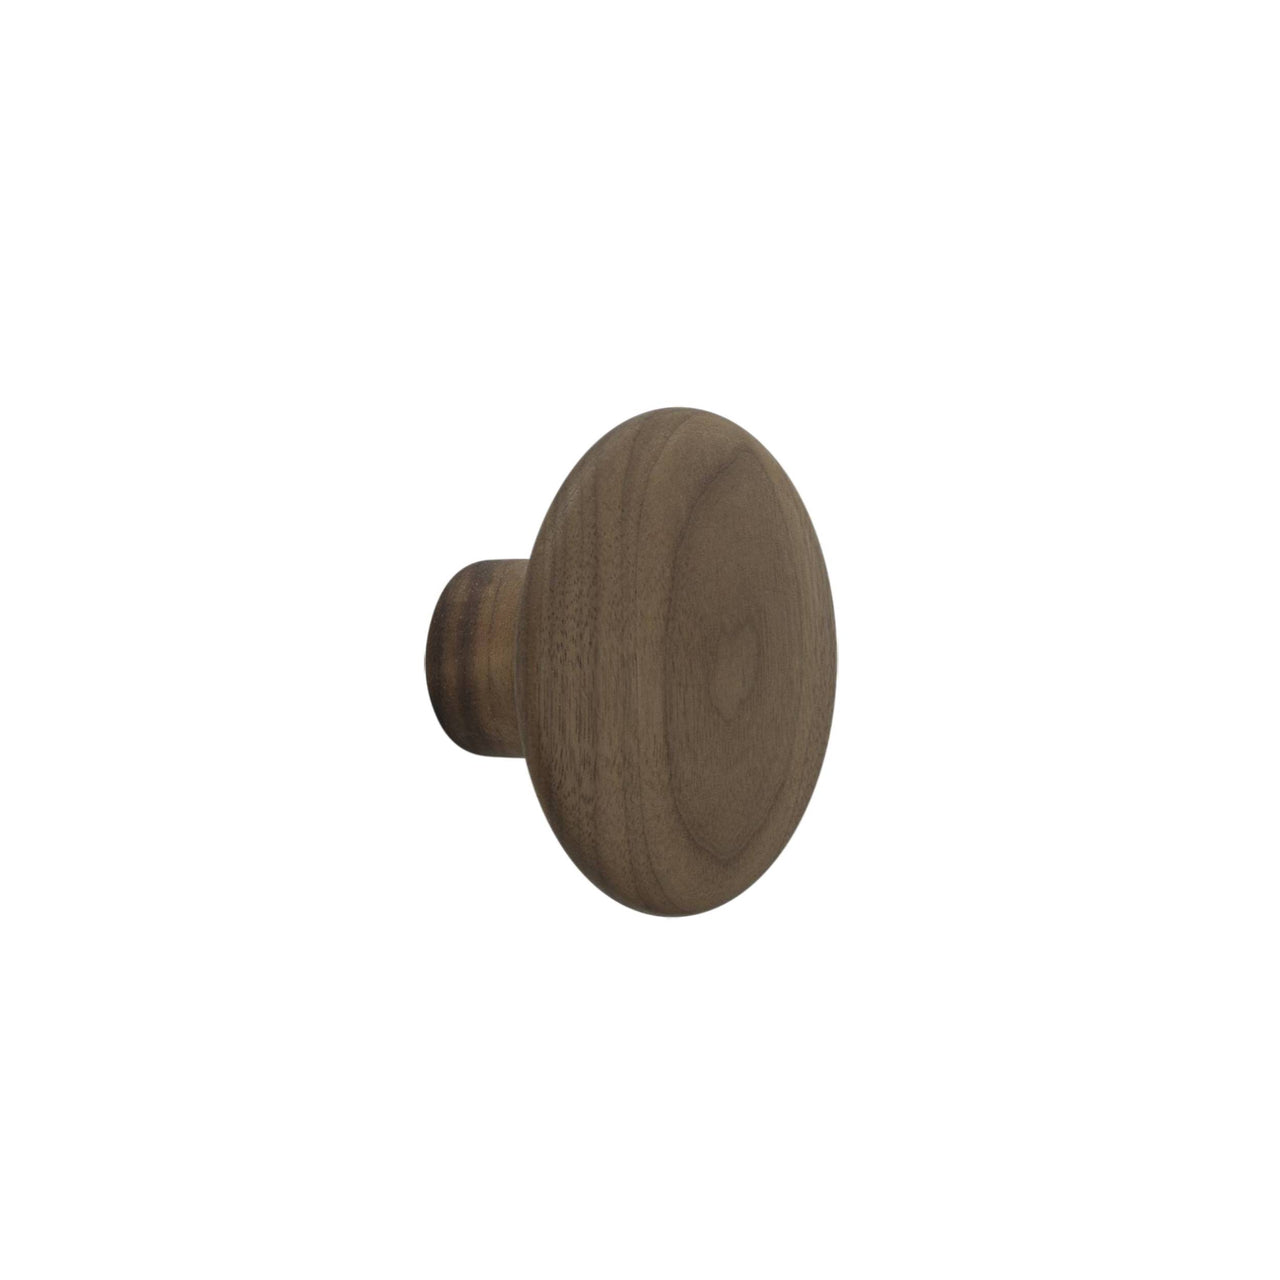 The Dots Wall Hooks: Small - 3.5